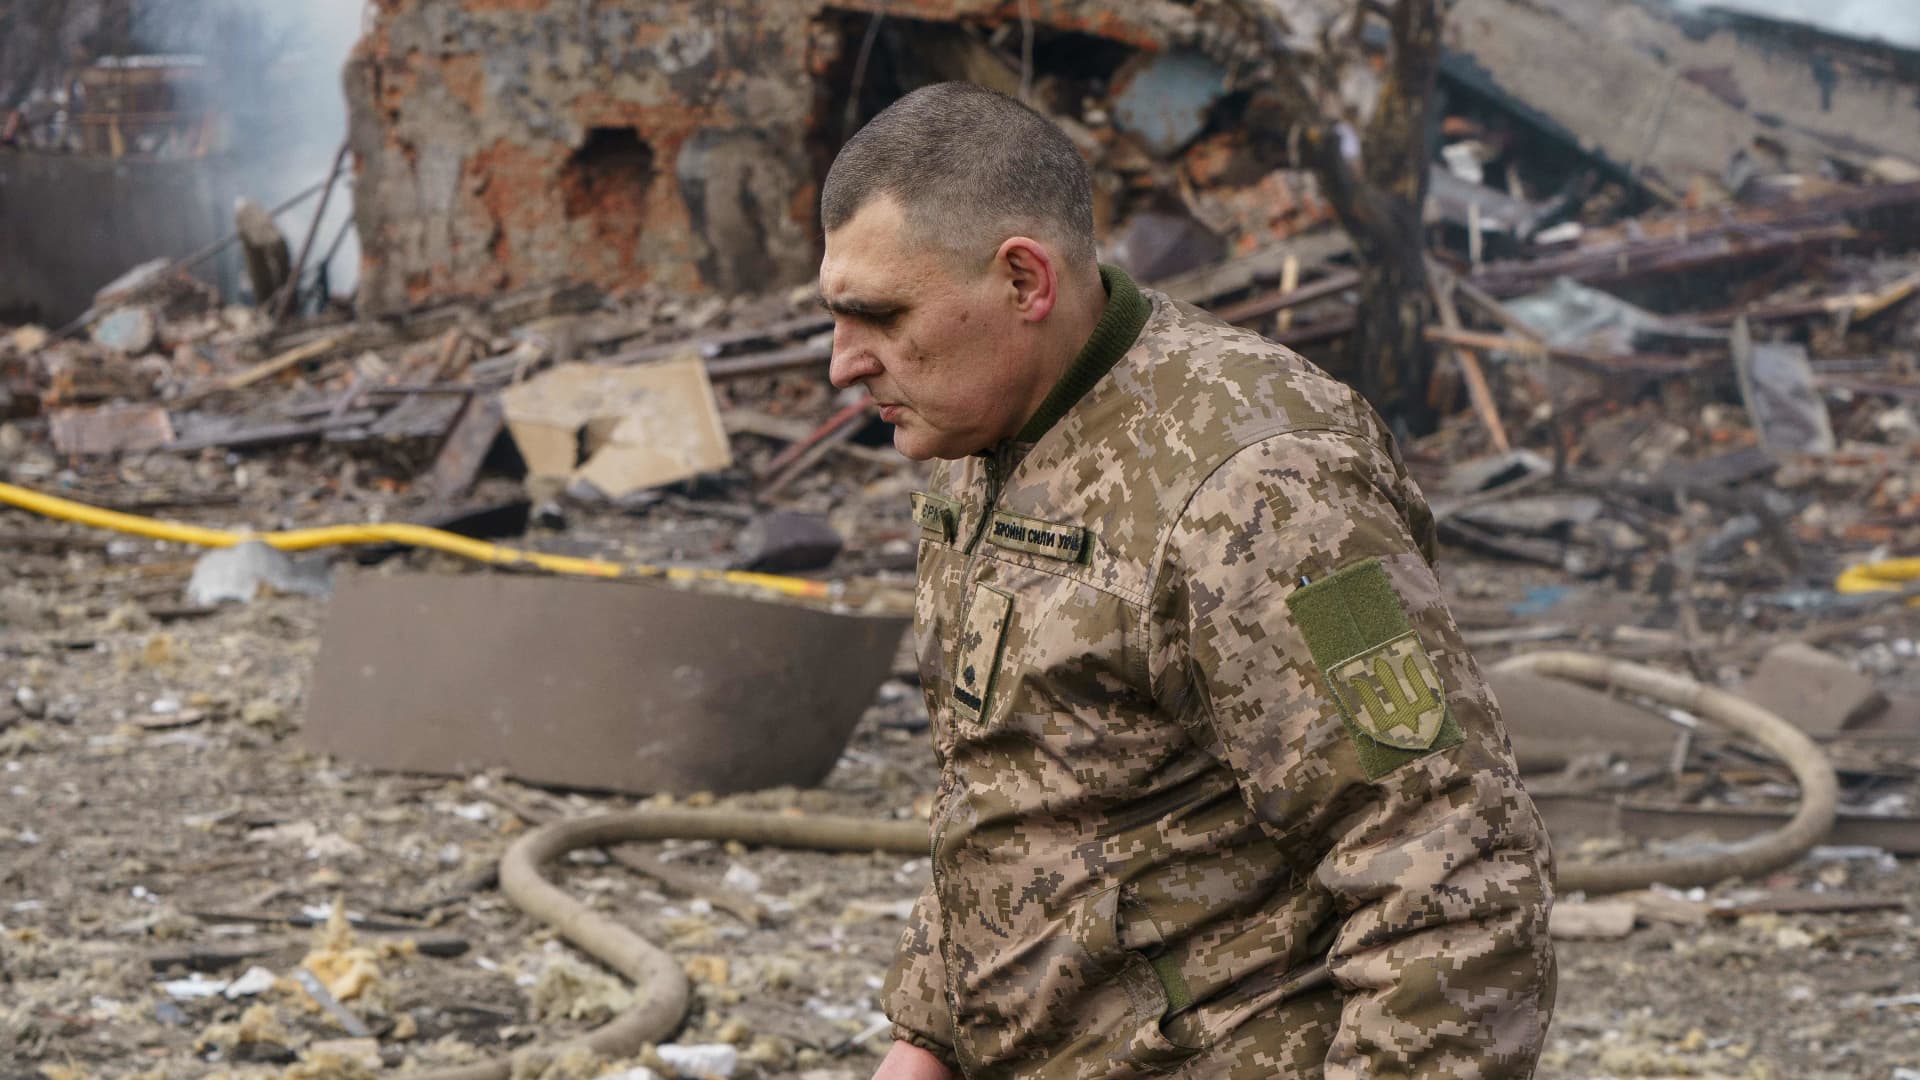 Ukraine army public affairs officer Valentin Yermolenko walks in front of a destroyed shoe factory following an airstrike in Dnipro on March 11, 2022.